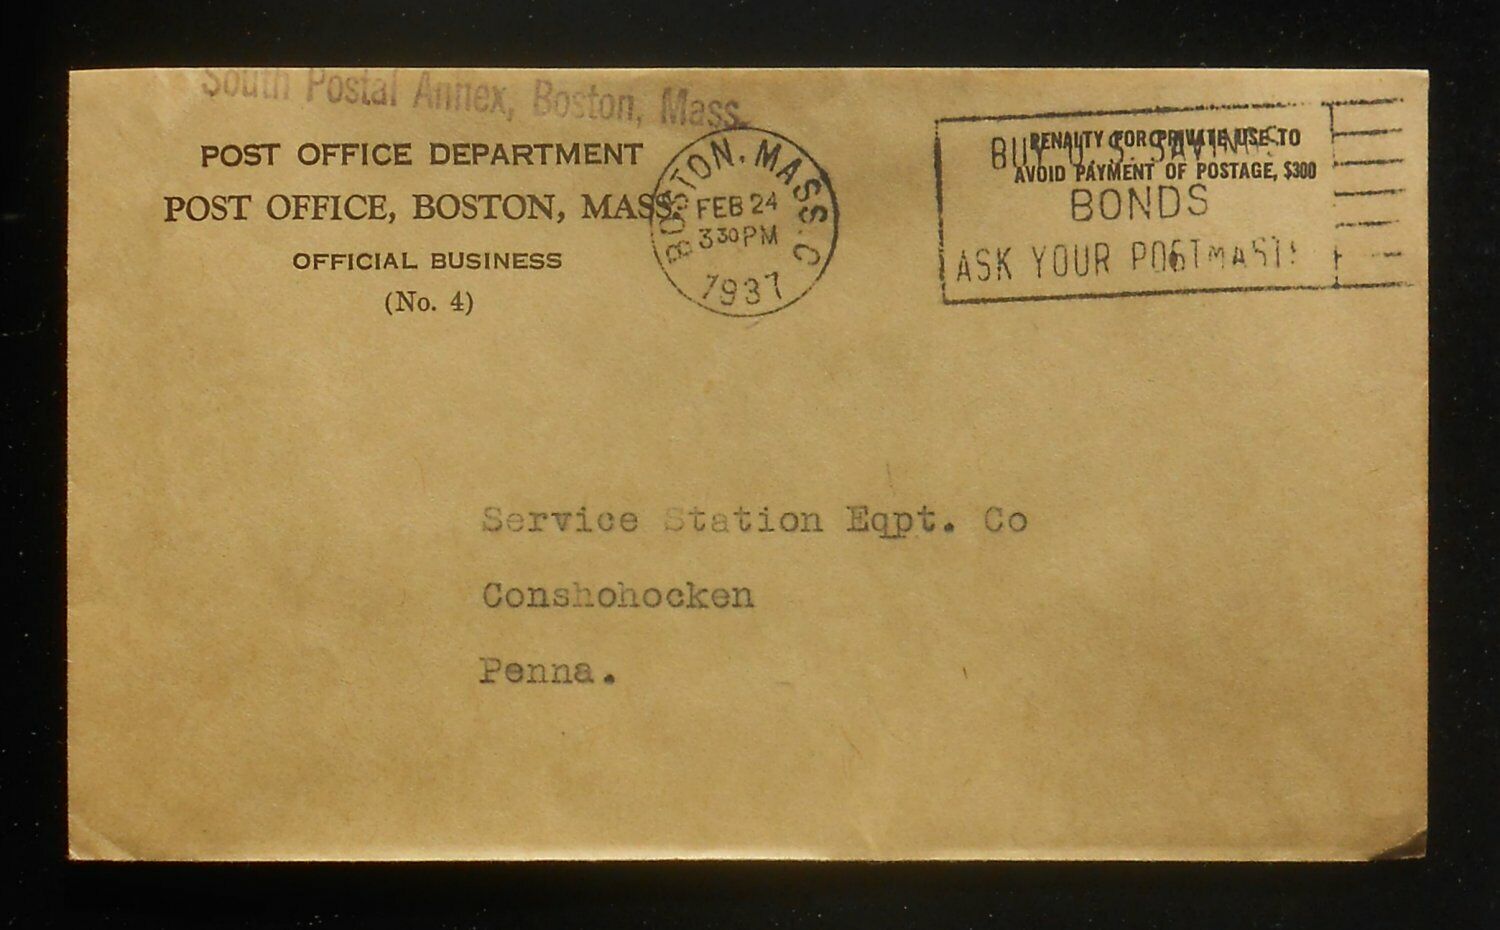 1937 POSTAL HISTORY Post Office Official Business South Postal Annex Boston MA